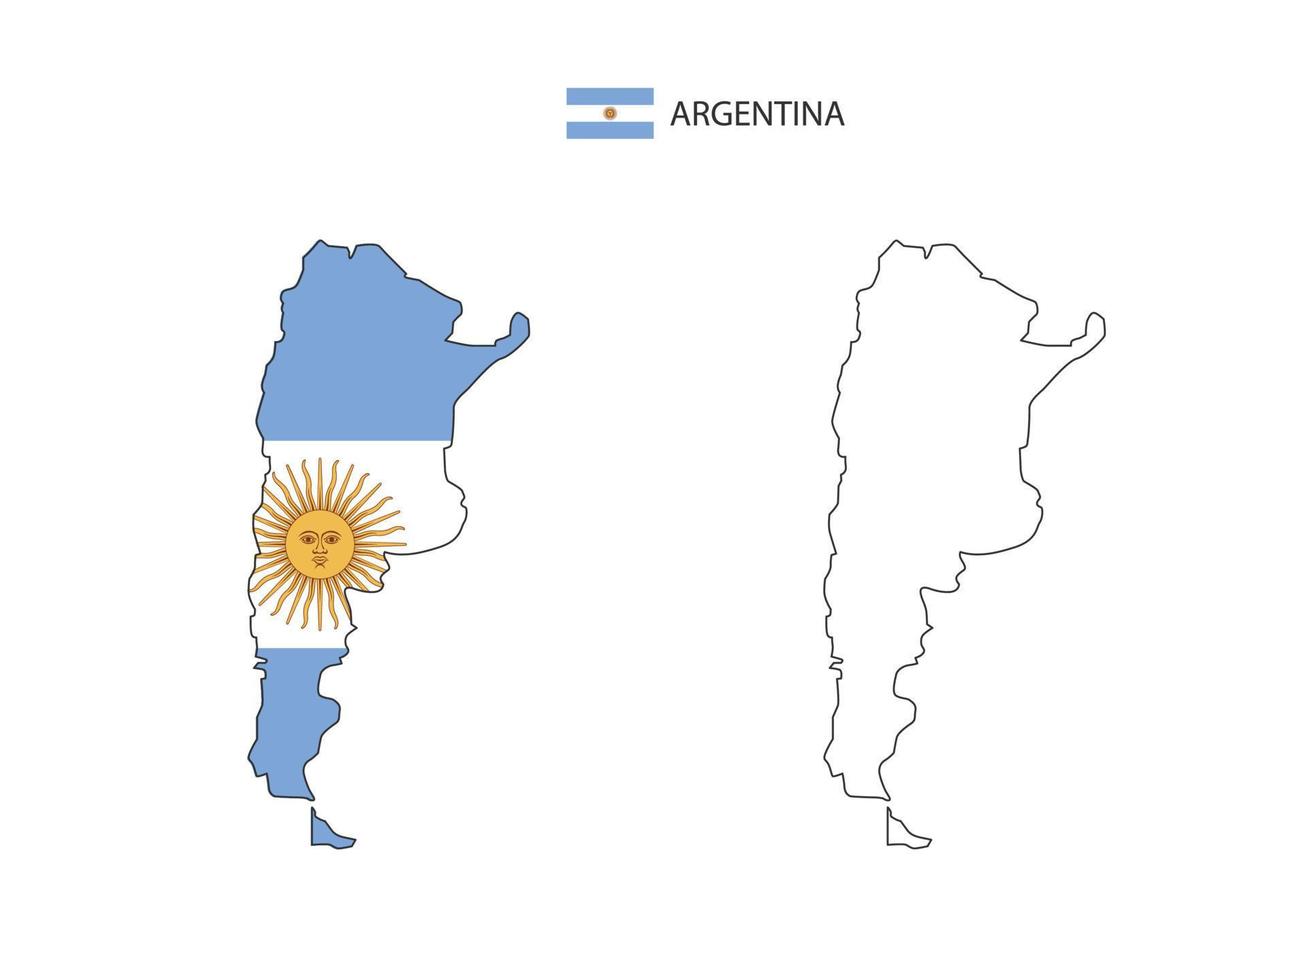 Argentina map city vector divided by outline simplicity style. Have 2 versions, black thin line version and color of country flag version. Both map were on the white background.